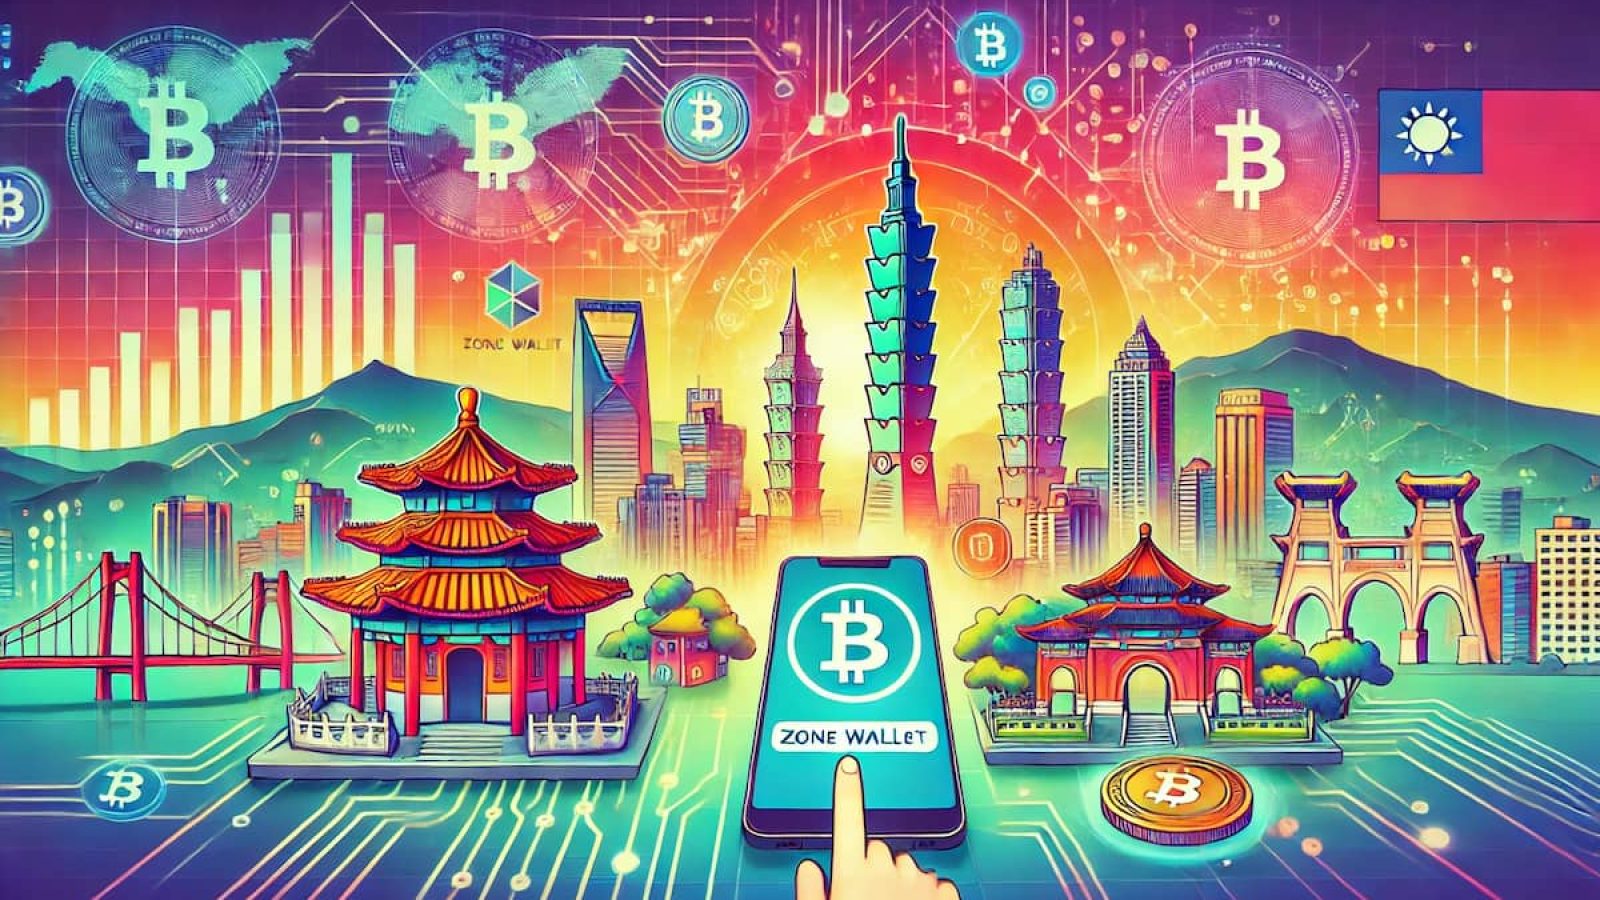 2024-07-09 16.36.38 - A vibrant and colorful image illustrating the rise of blockchain projects in Taiwan. The image shows elements like blockchain symbols, Taiwanese landm